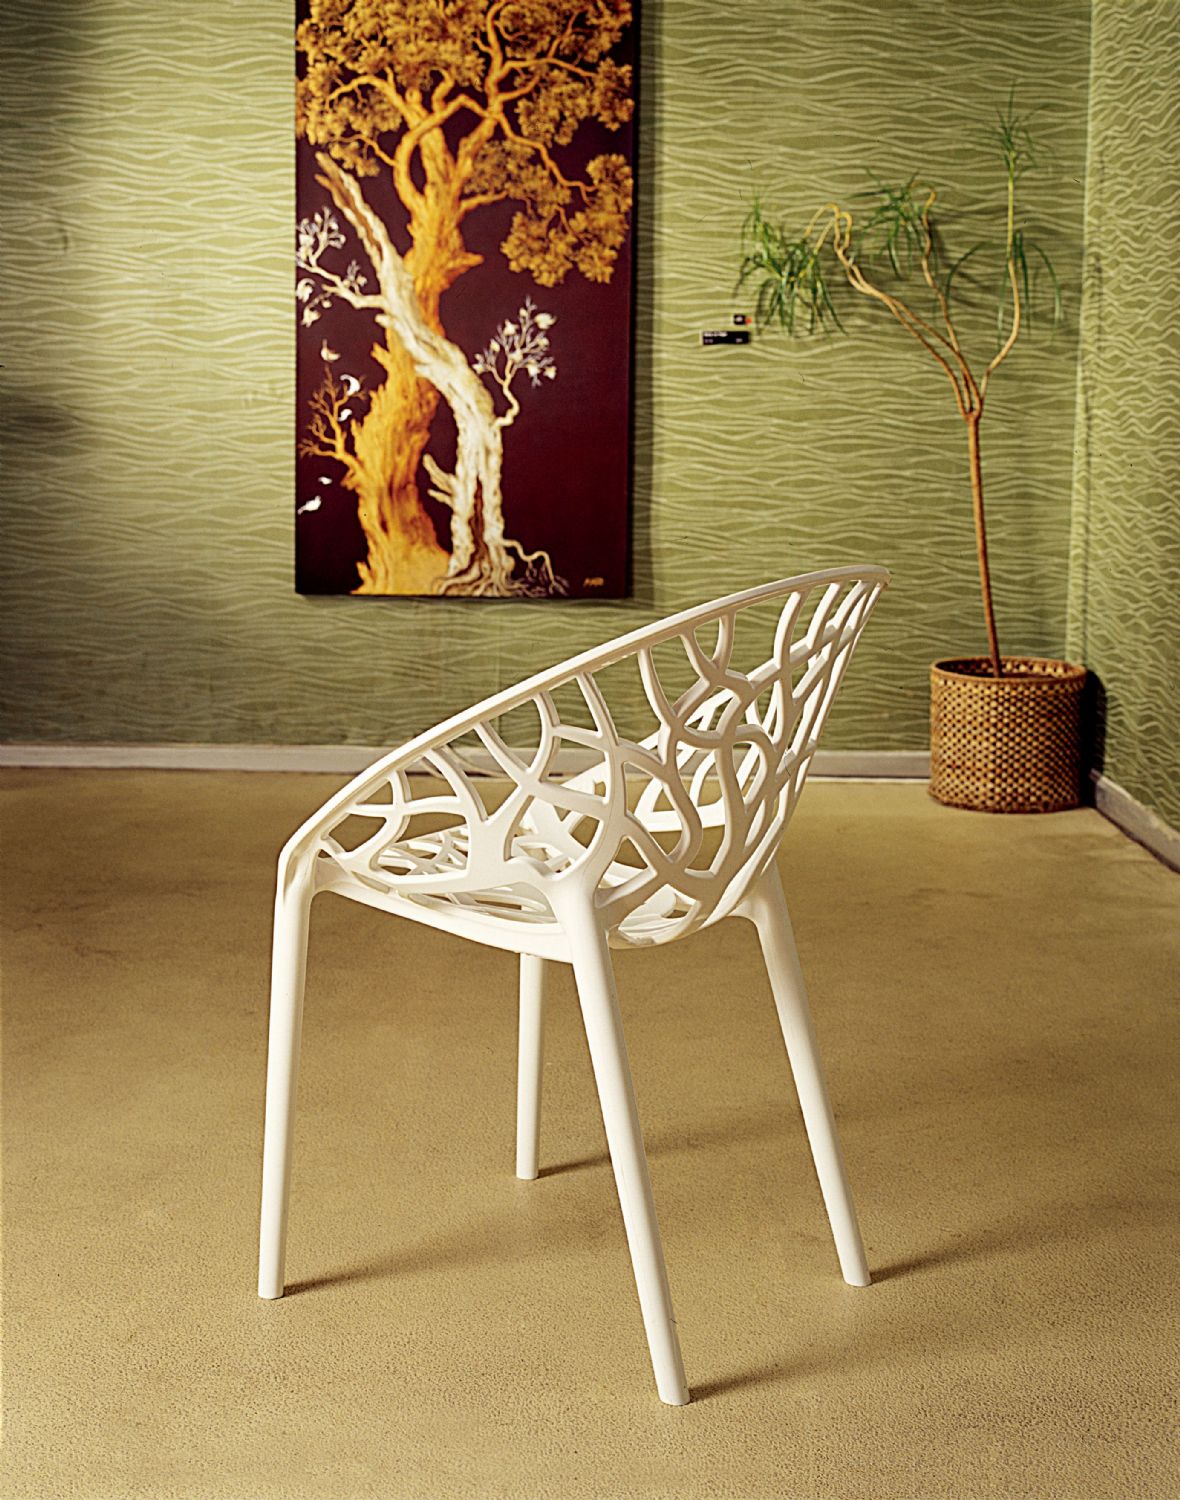 Crystal Polycarbonate Modern Dining Chair Transparent Amber ISP052-TAMB - 1